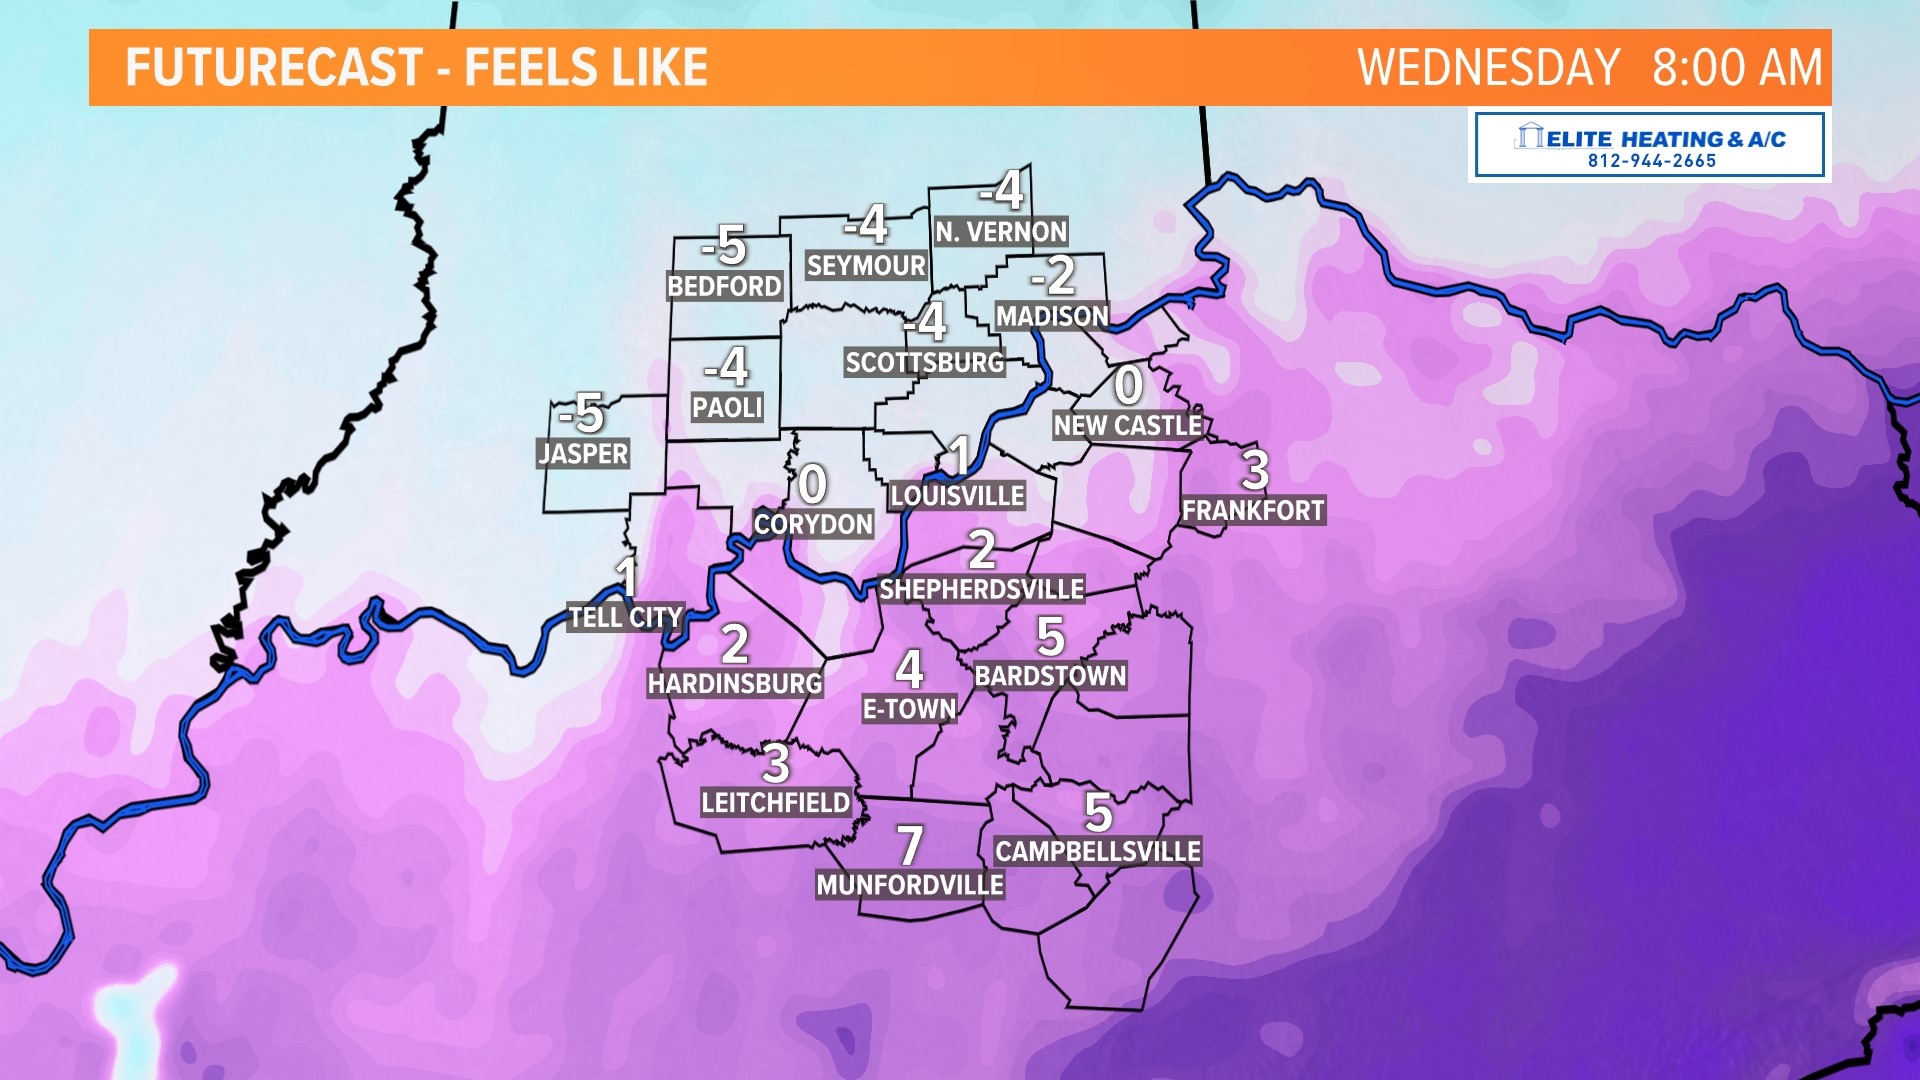 Temperatures should dip into the low teens early Wednesday with wind chills on either side of zero degrees.